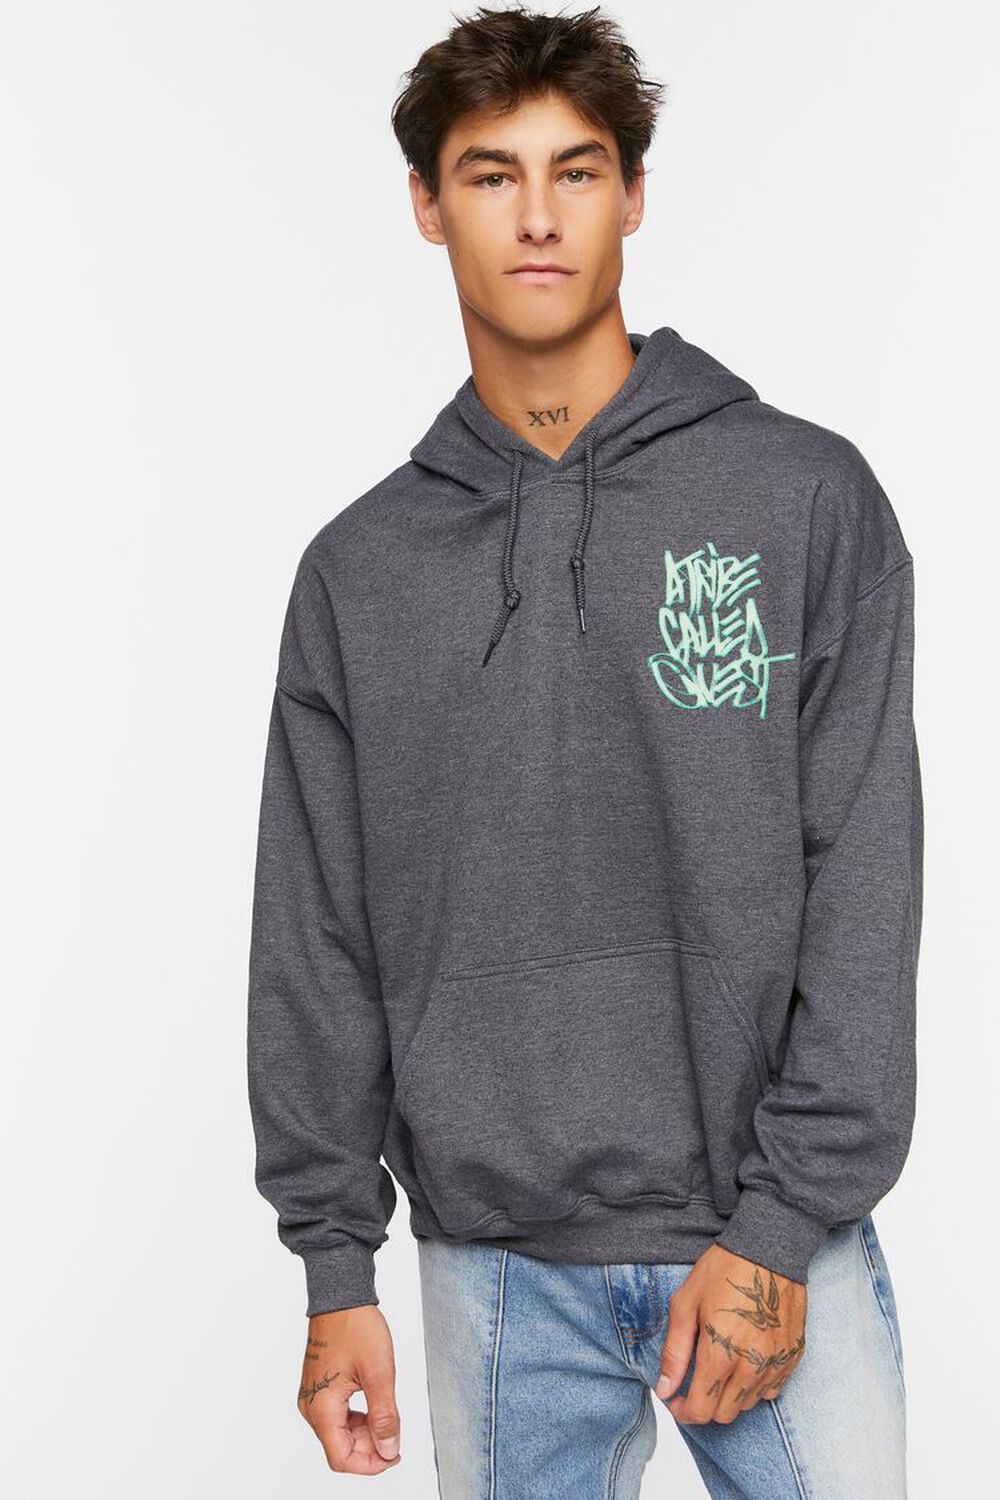 HEATHER GREY/MULTI A Tribe Called Quest Graphic Hoodie, image 1